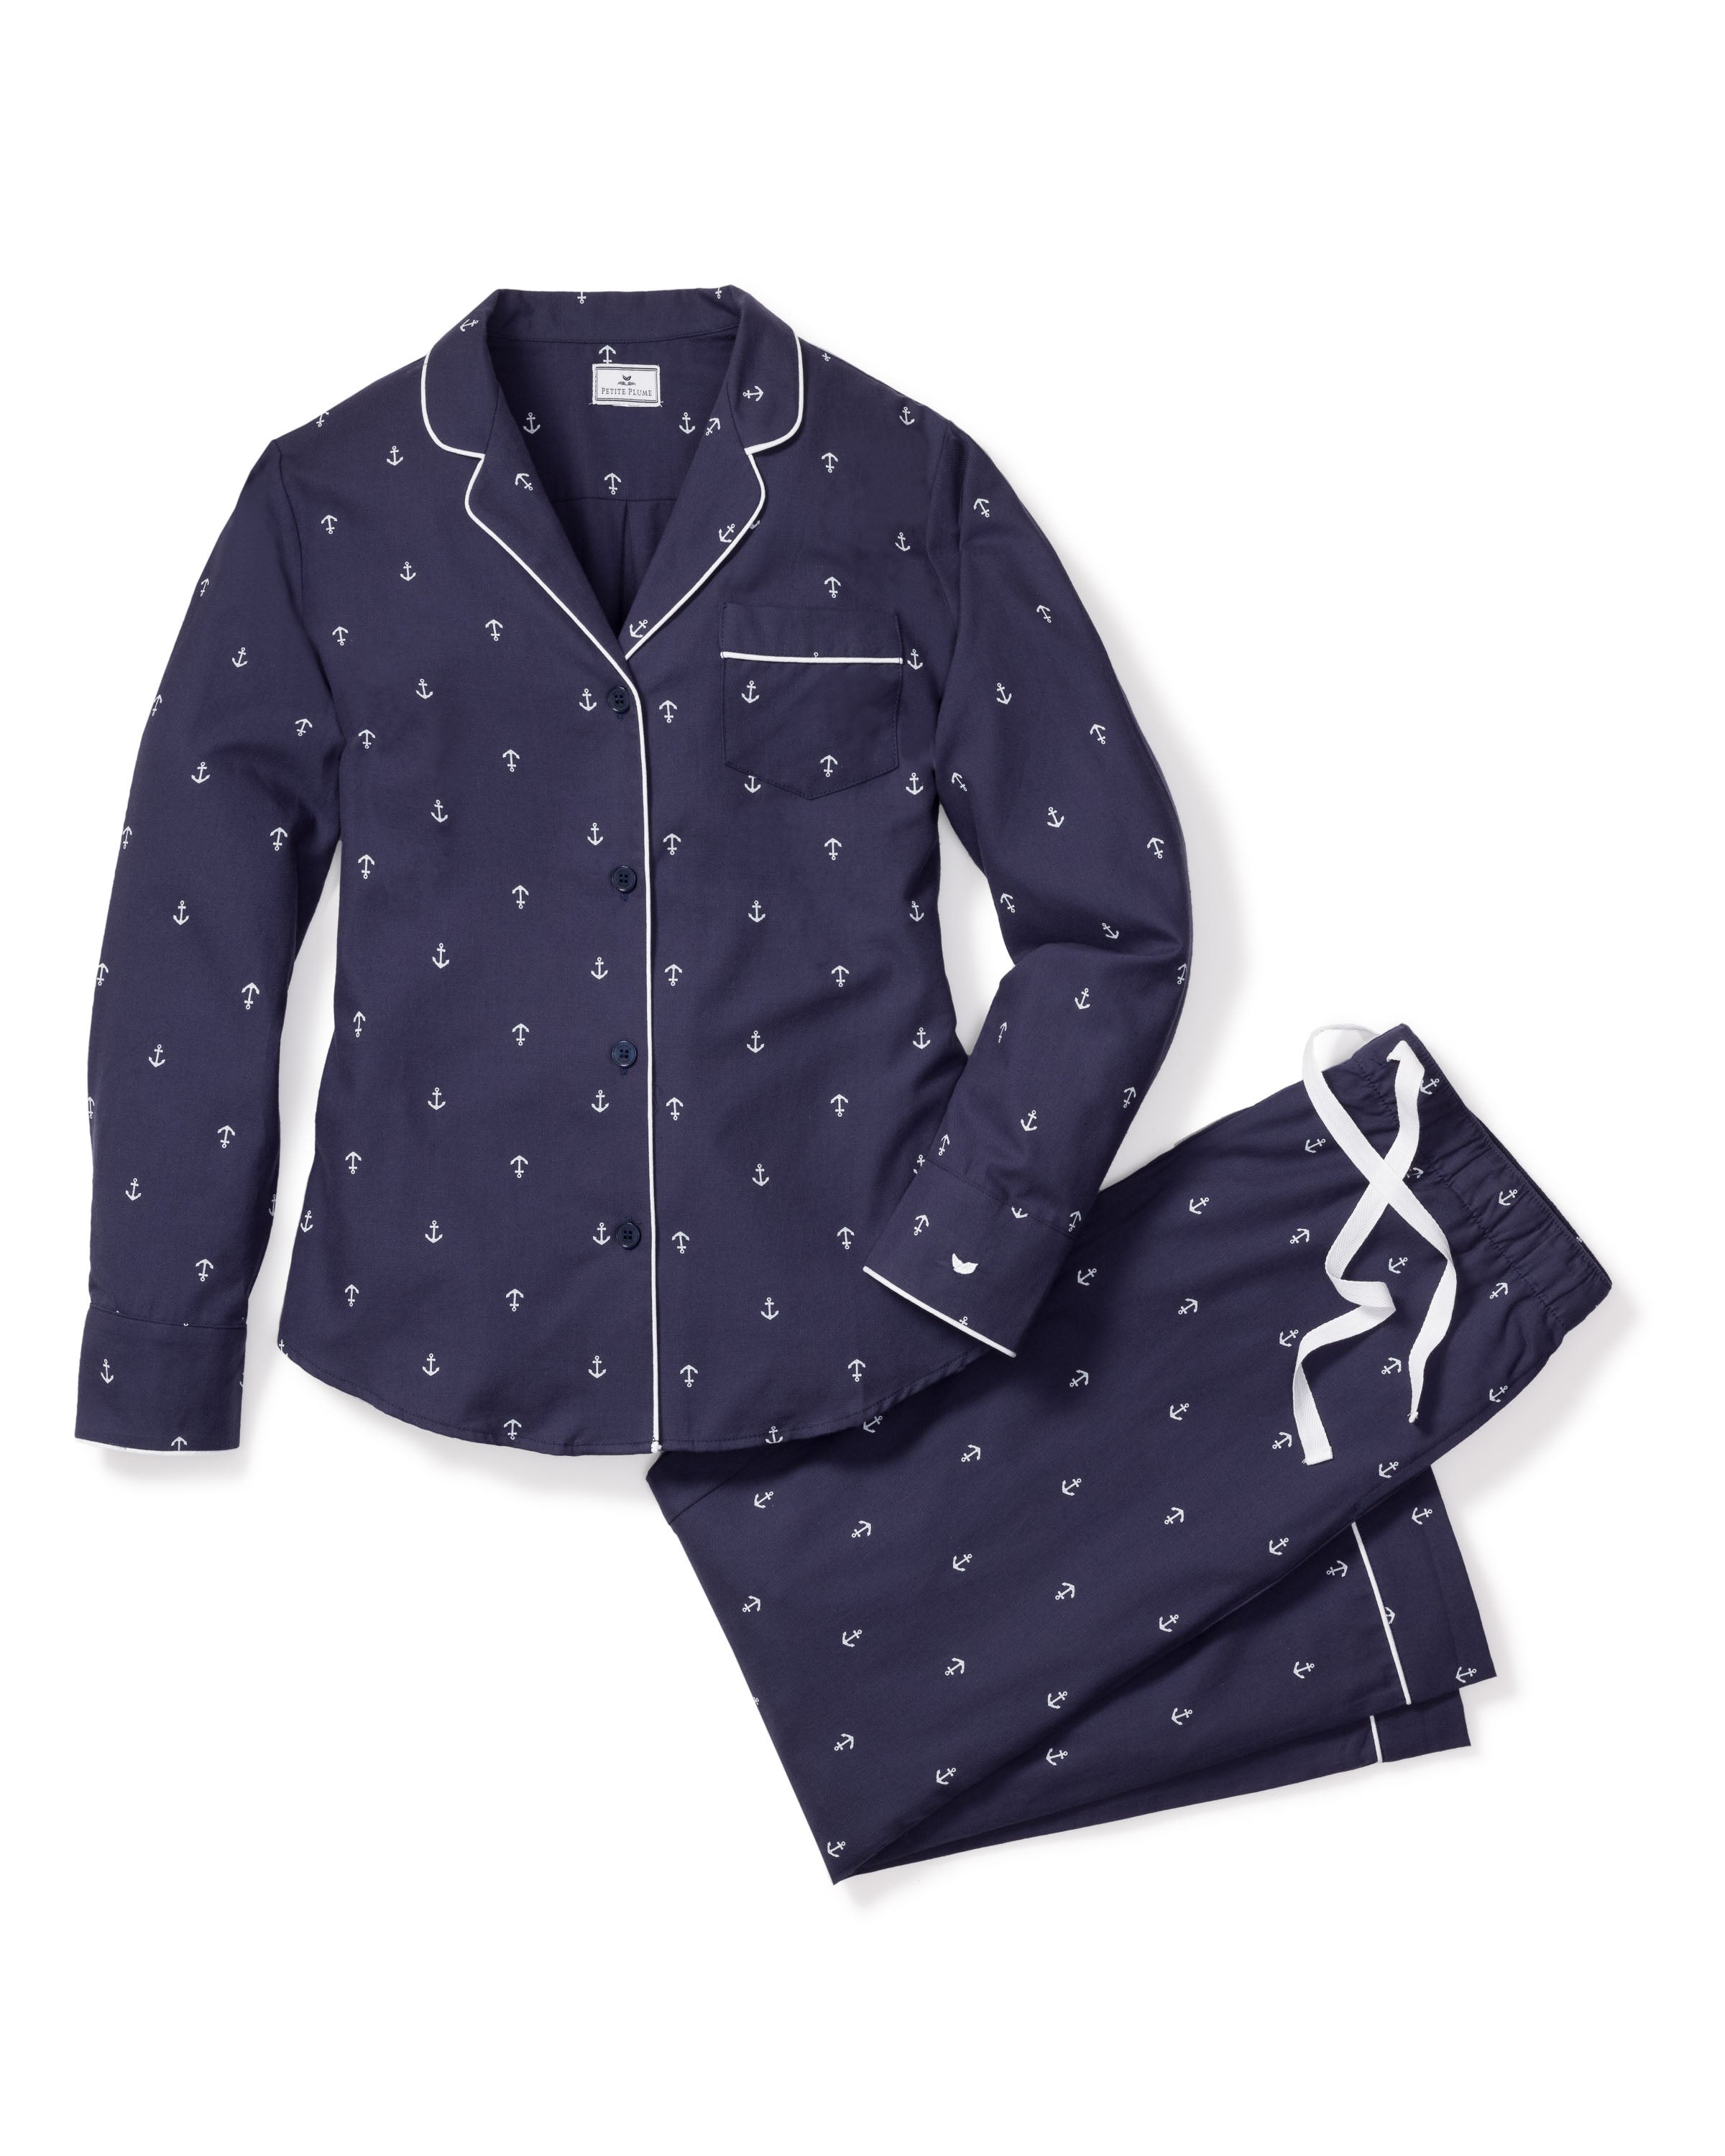 Women's Twill Pajama Set in Portsmouth Anchors